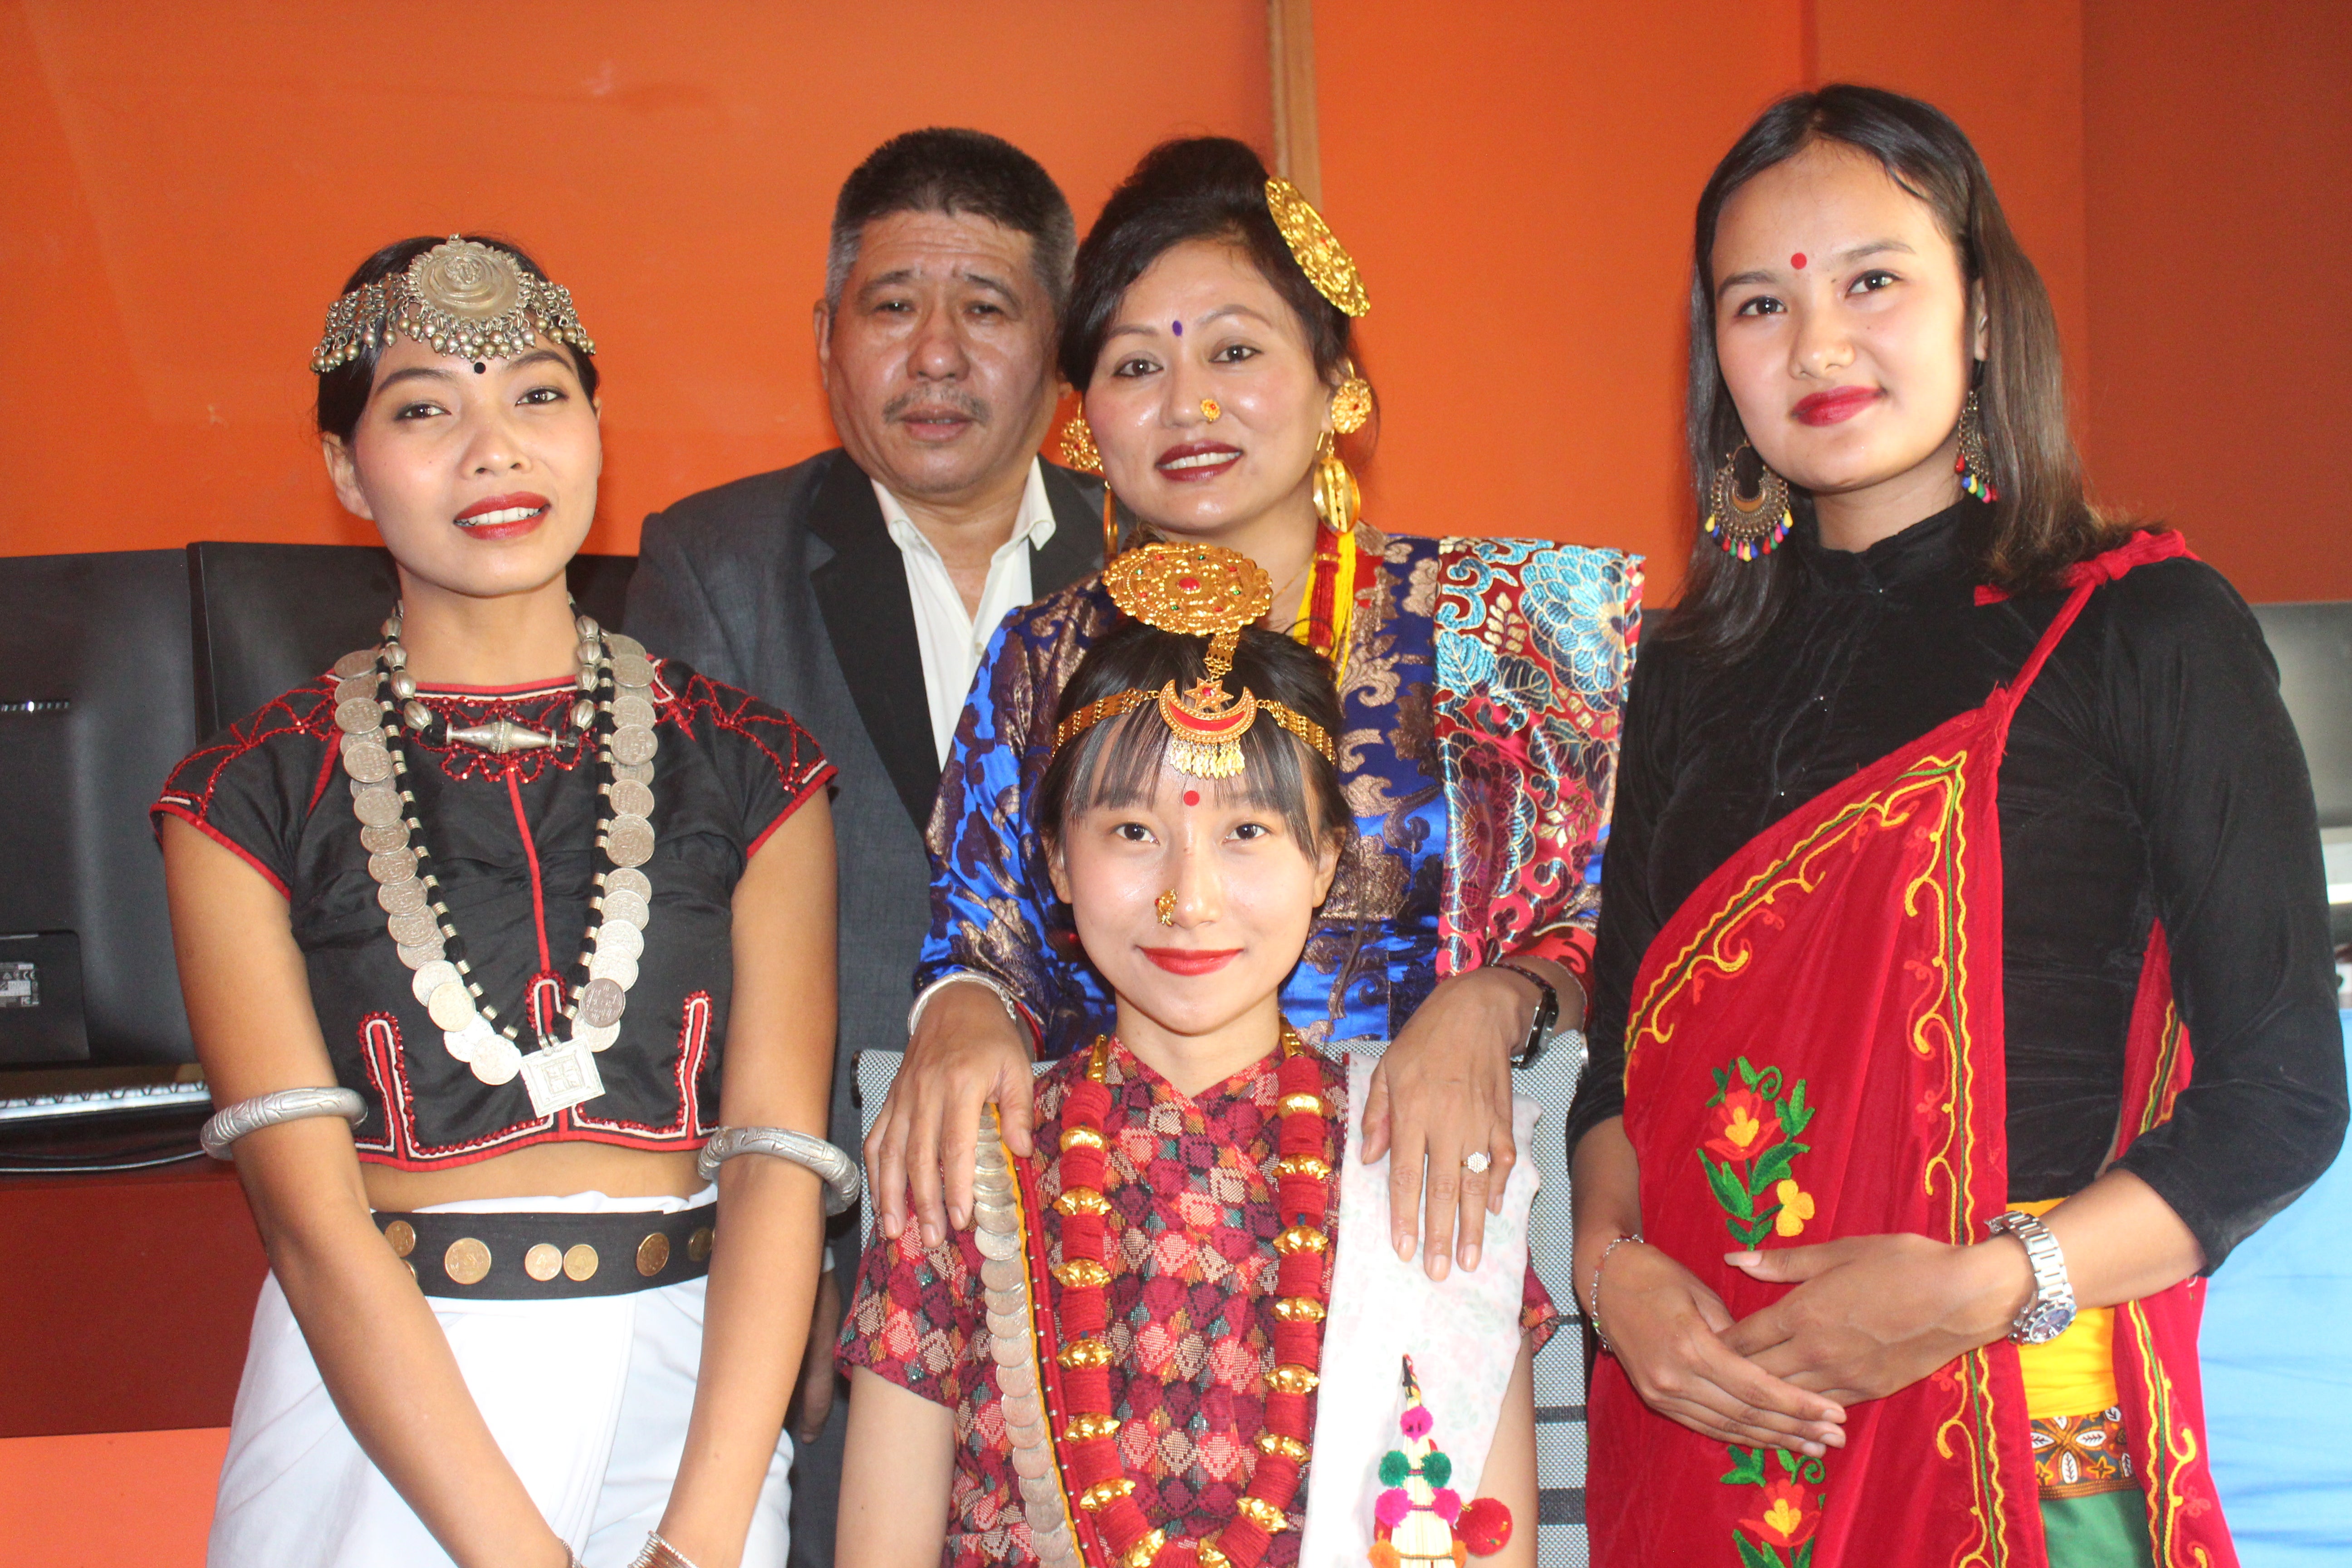 nepali people and culture